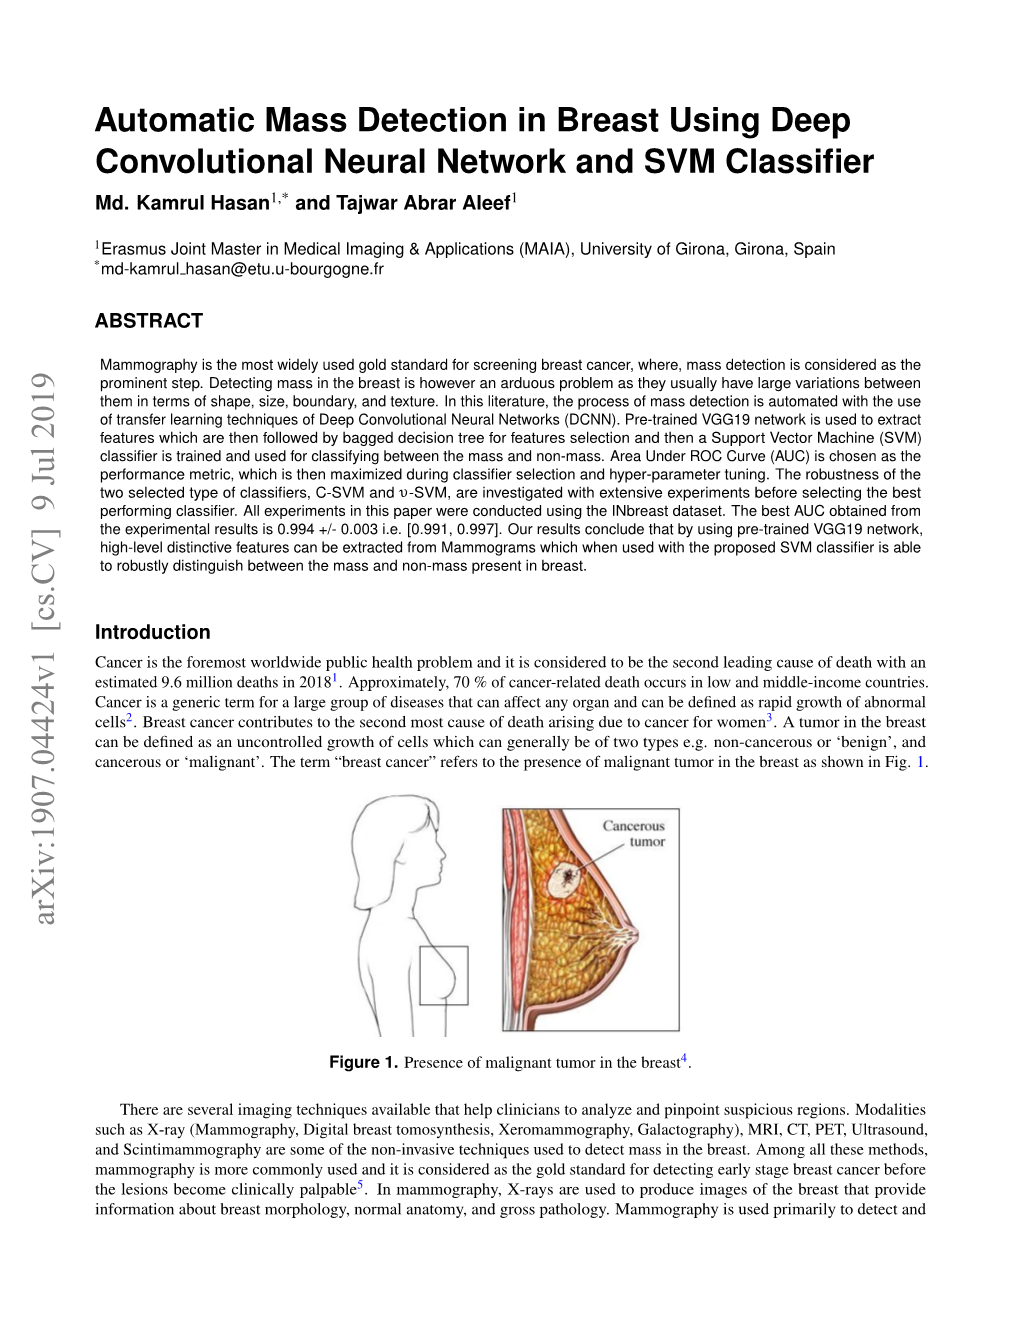 Automatic Mass Detection in Breast Using Deep Convolutional Neural Network and SVM Classiﬁer Md